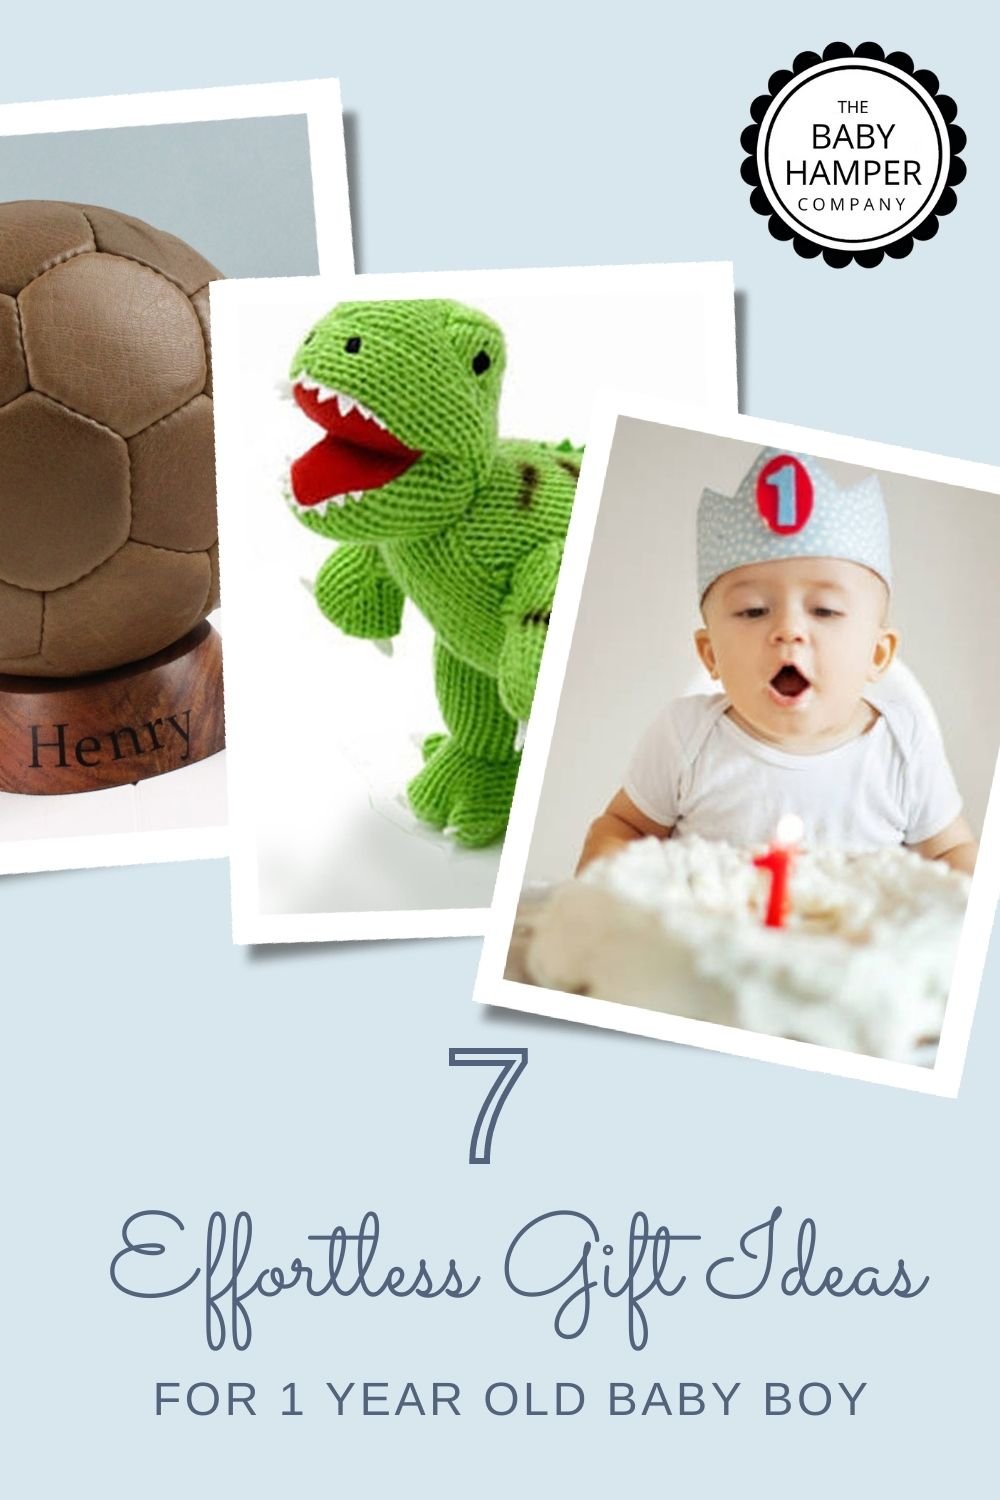 6 Perfect Gift Ideas for 1 Year Old Baby Girl